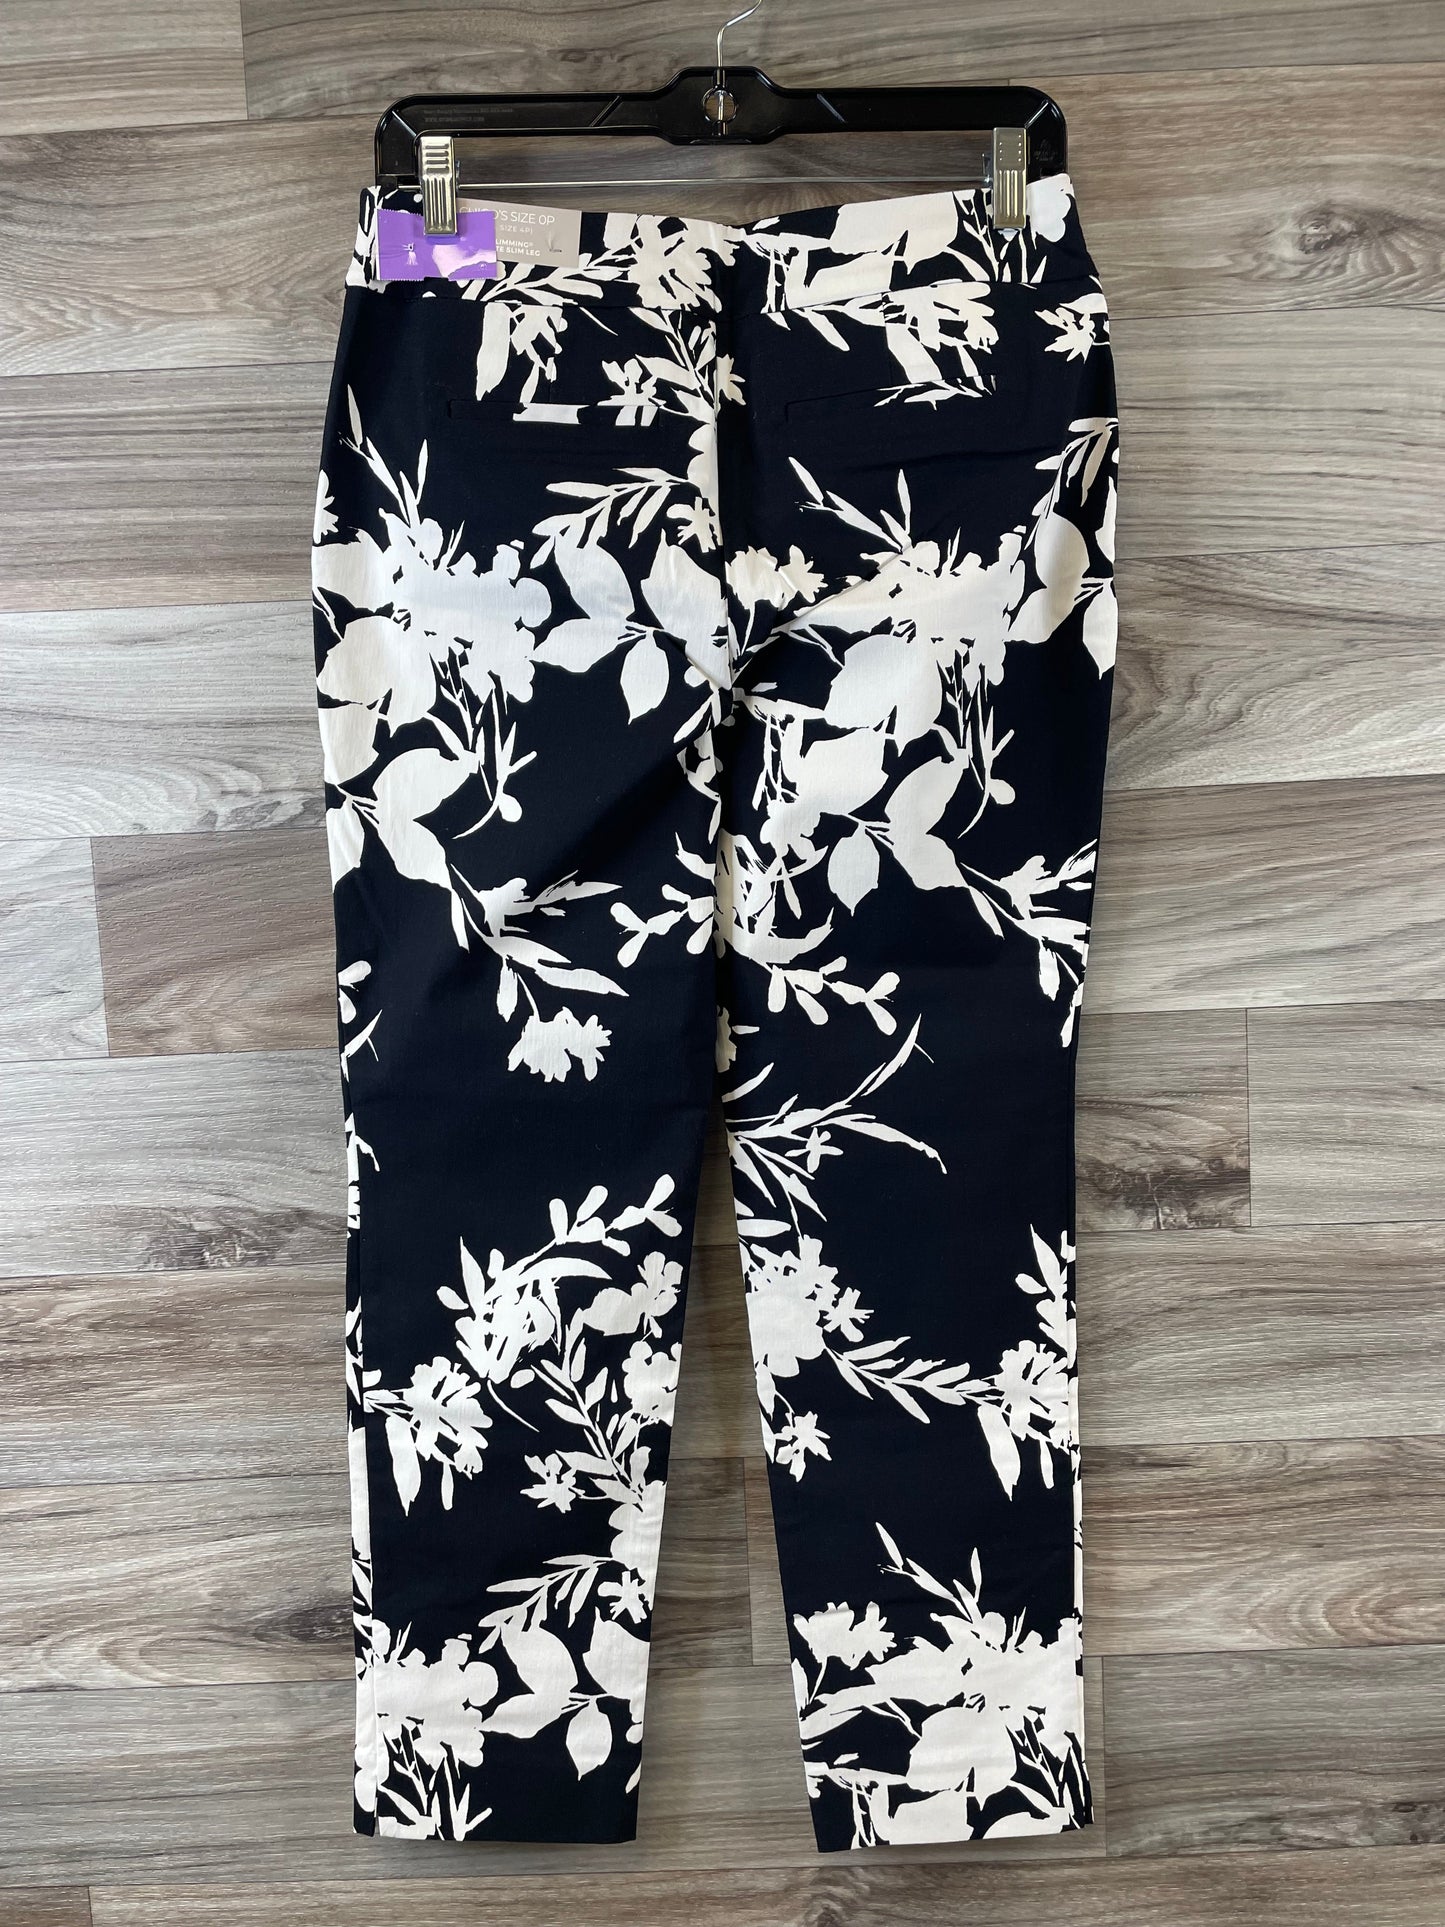 Black & White Pants Other Chicos, Size 4petite